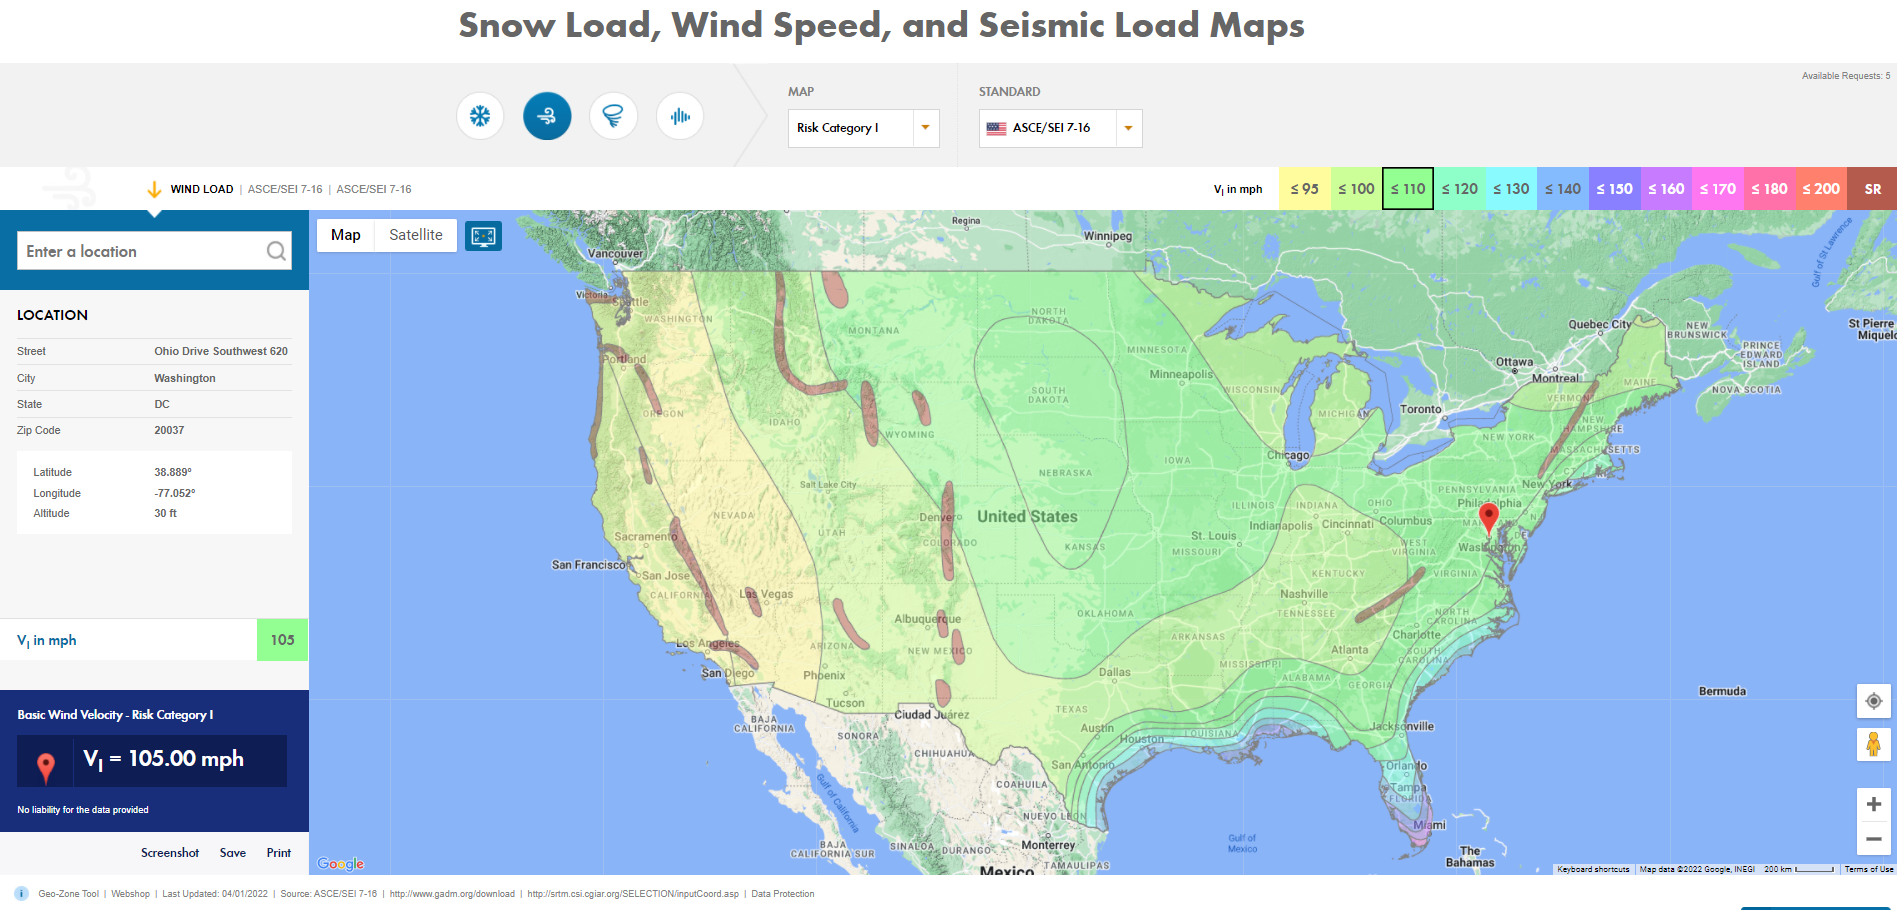 Online Service "Snow Load, Wind Speed, and Seismic Load Maps"